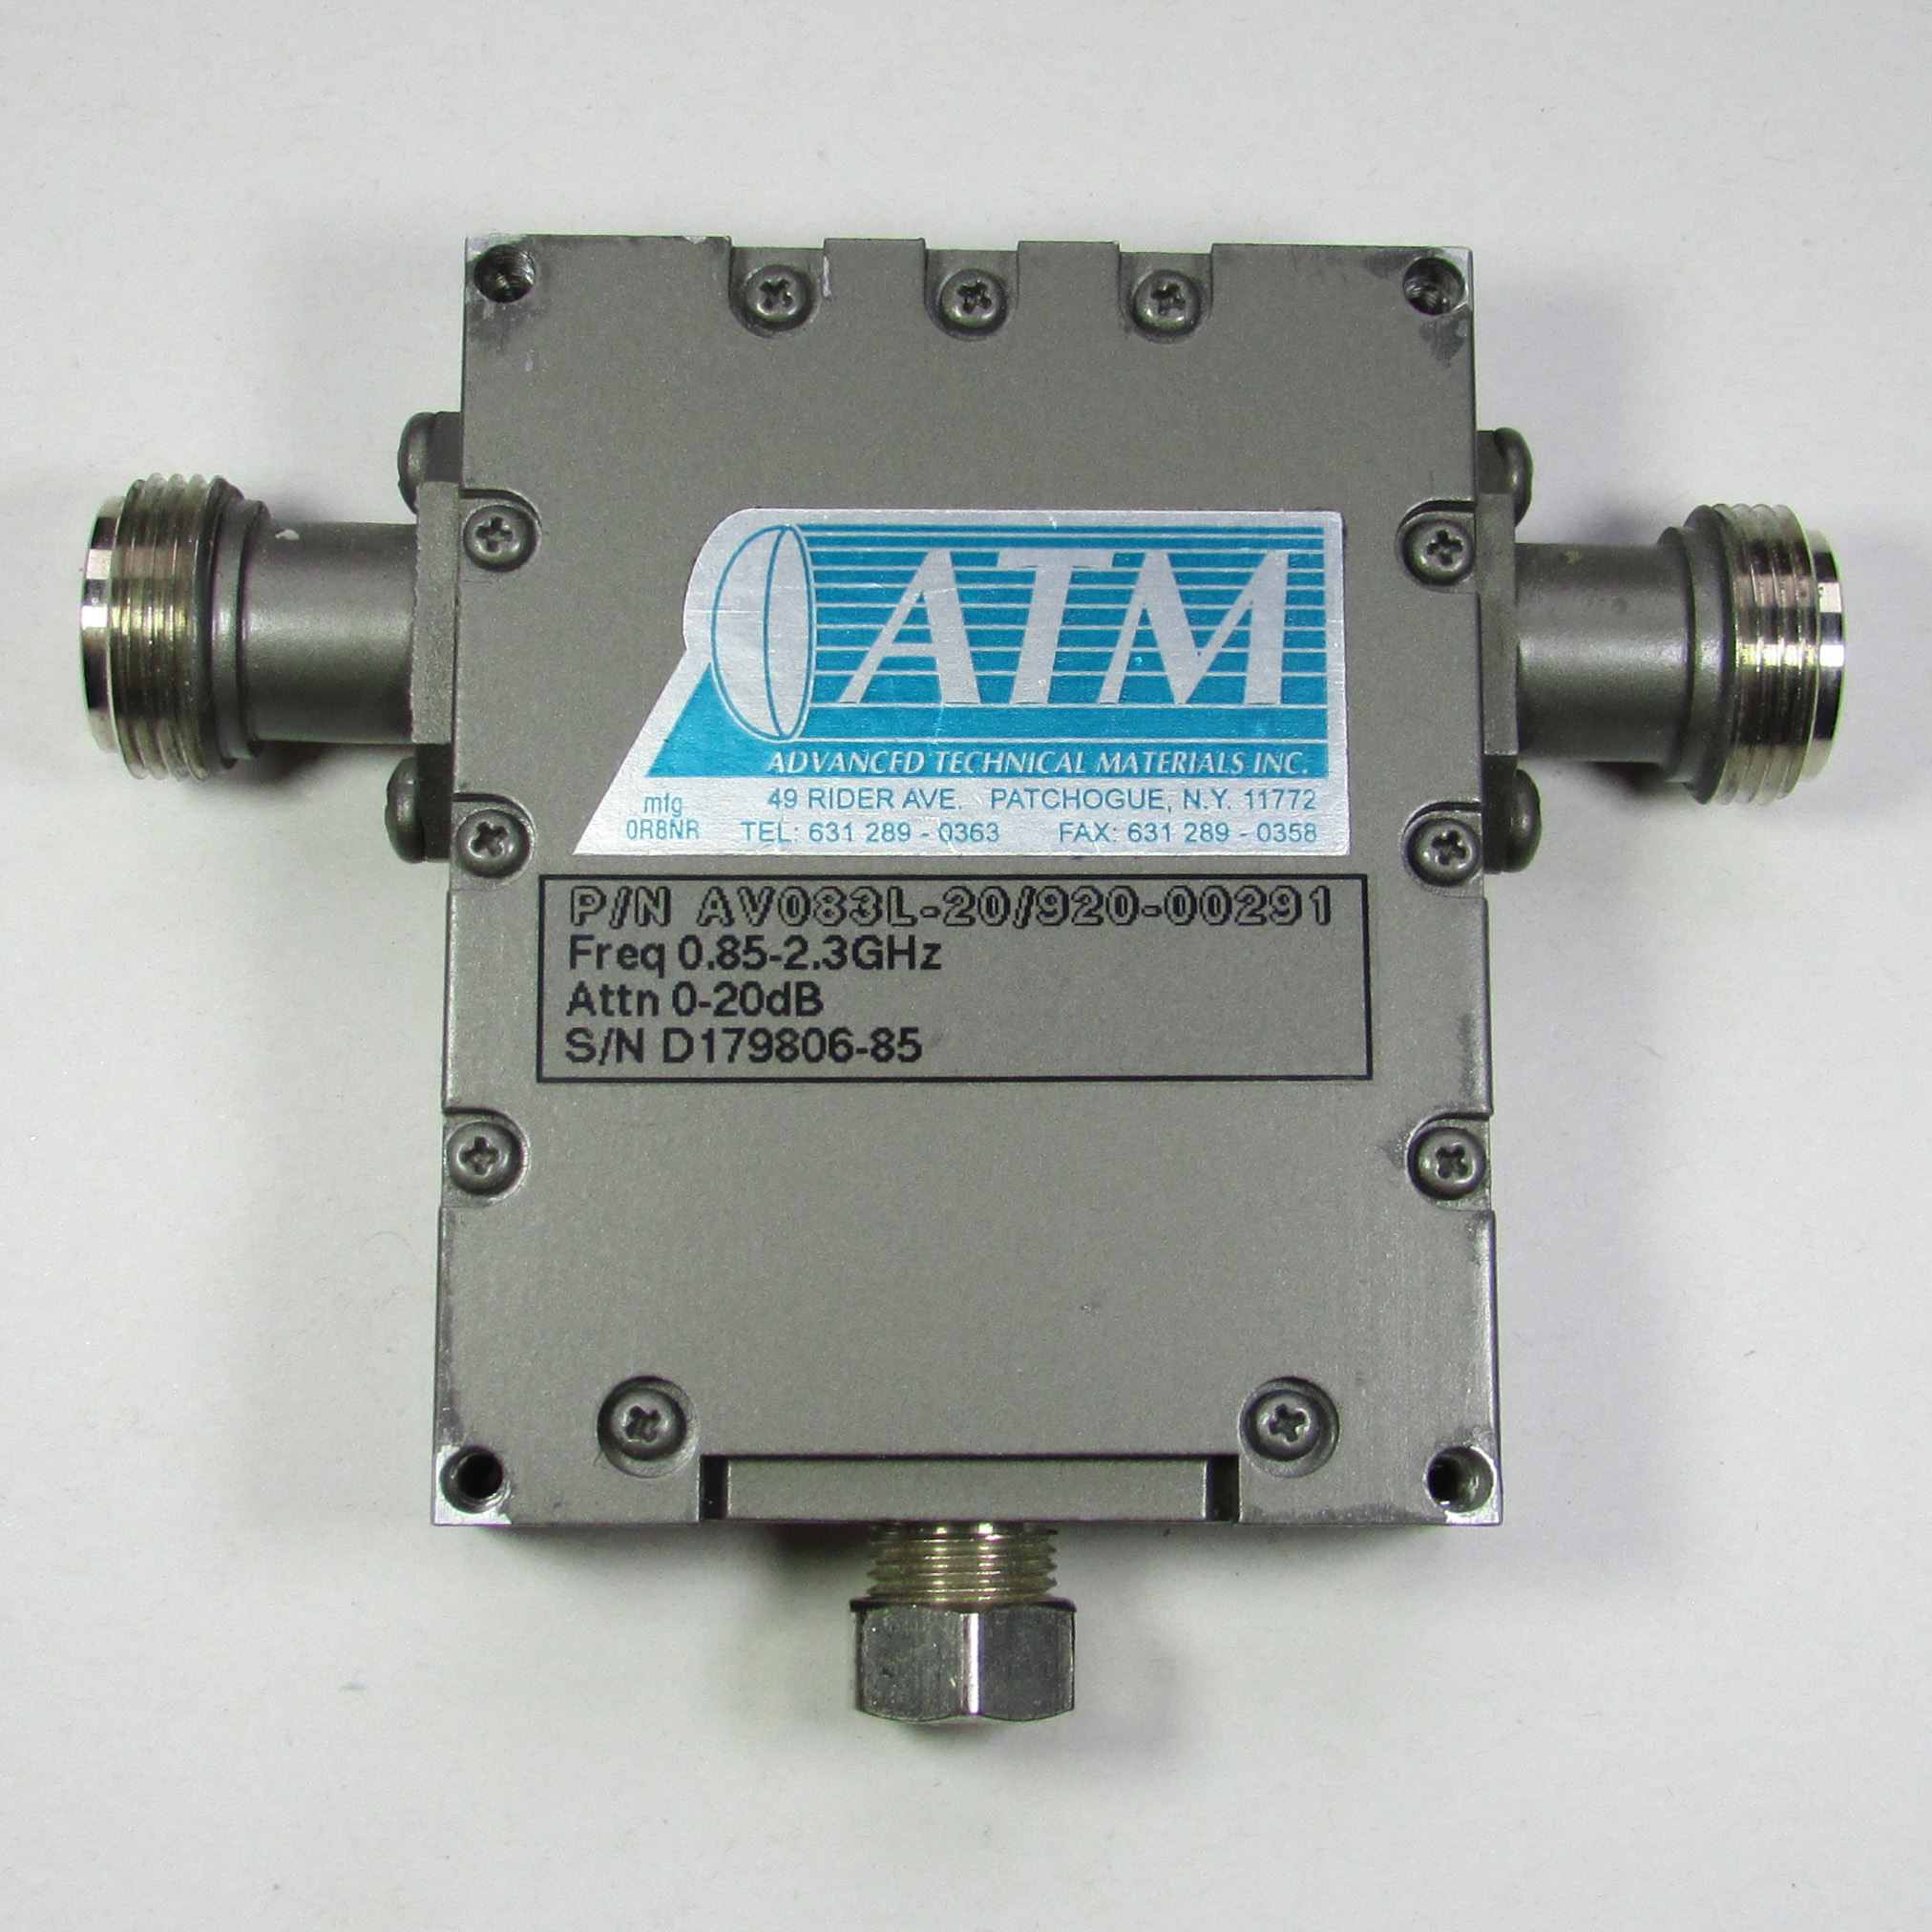 ATM AV083L-20 / 920-00291 0.85-2.3GHz 0-20dB 7W Continuously Adjustable Attenuator